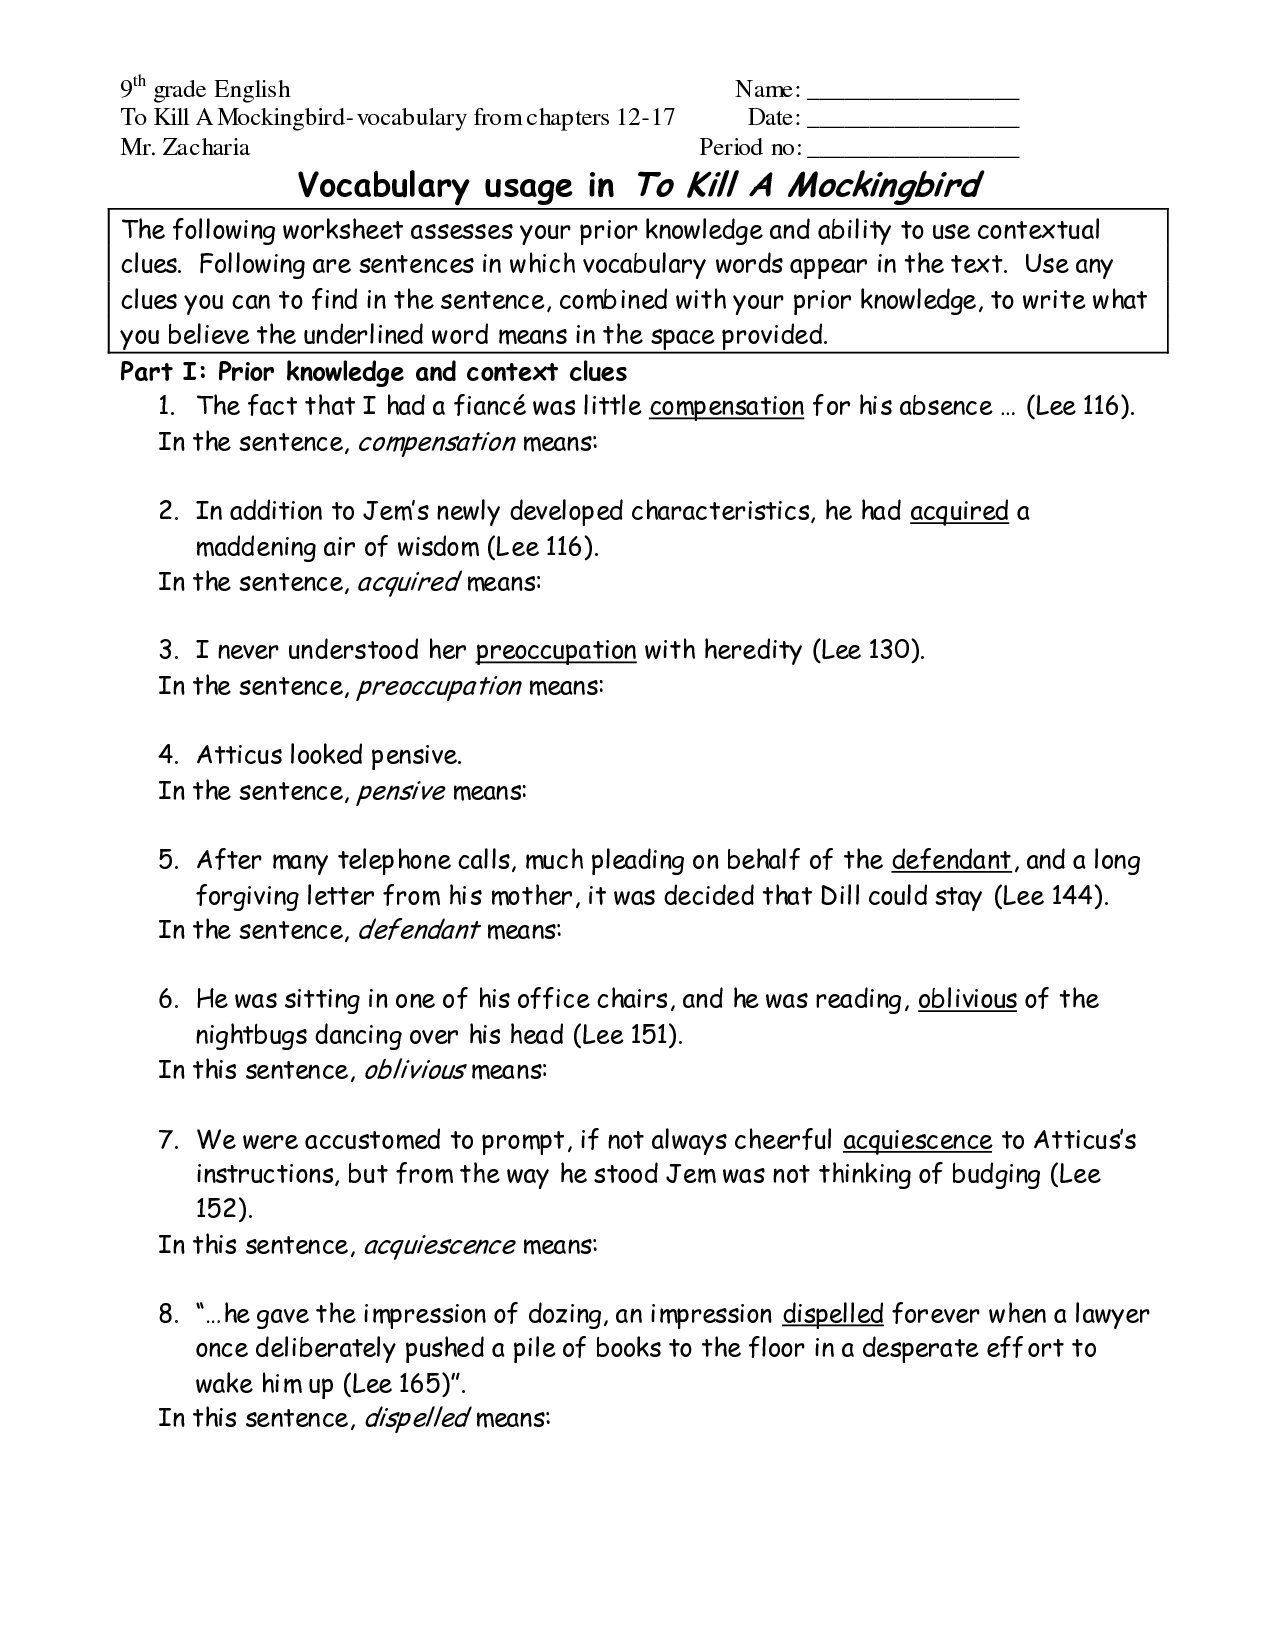 19-best-images-of-9th-grade-english-worksheets-printable-9th-grade